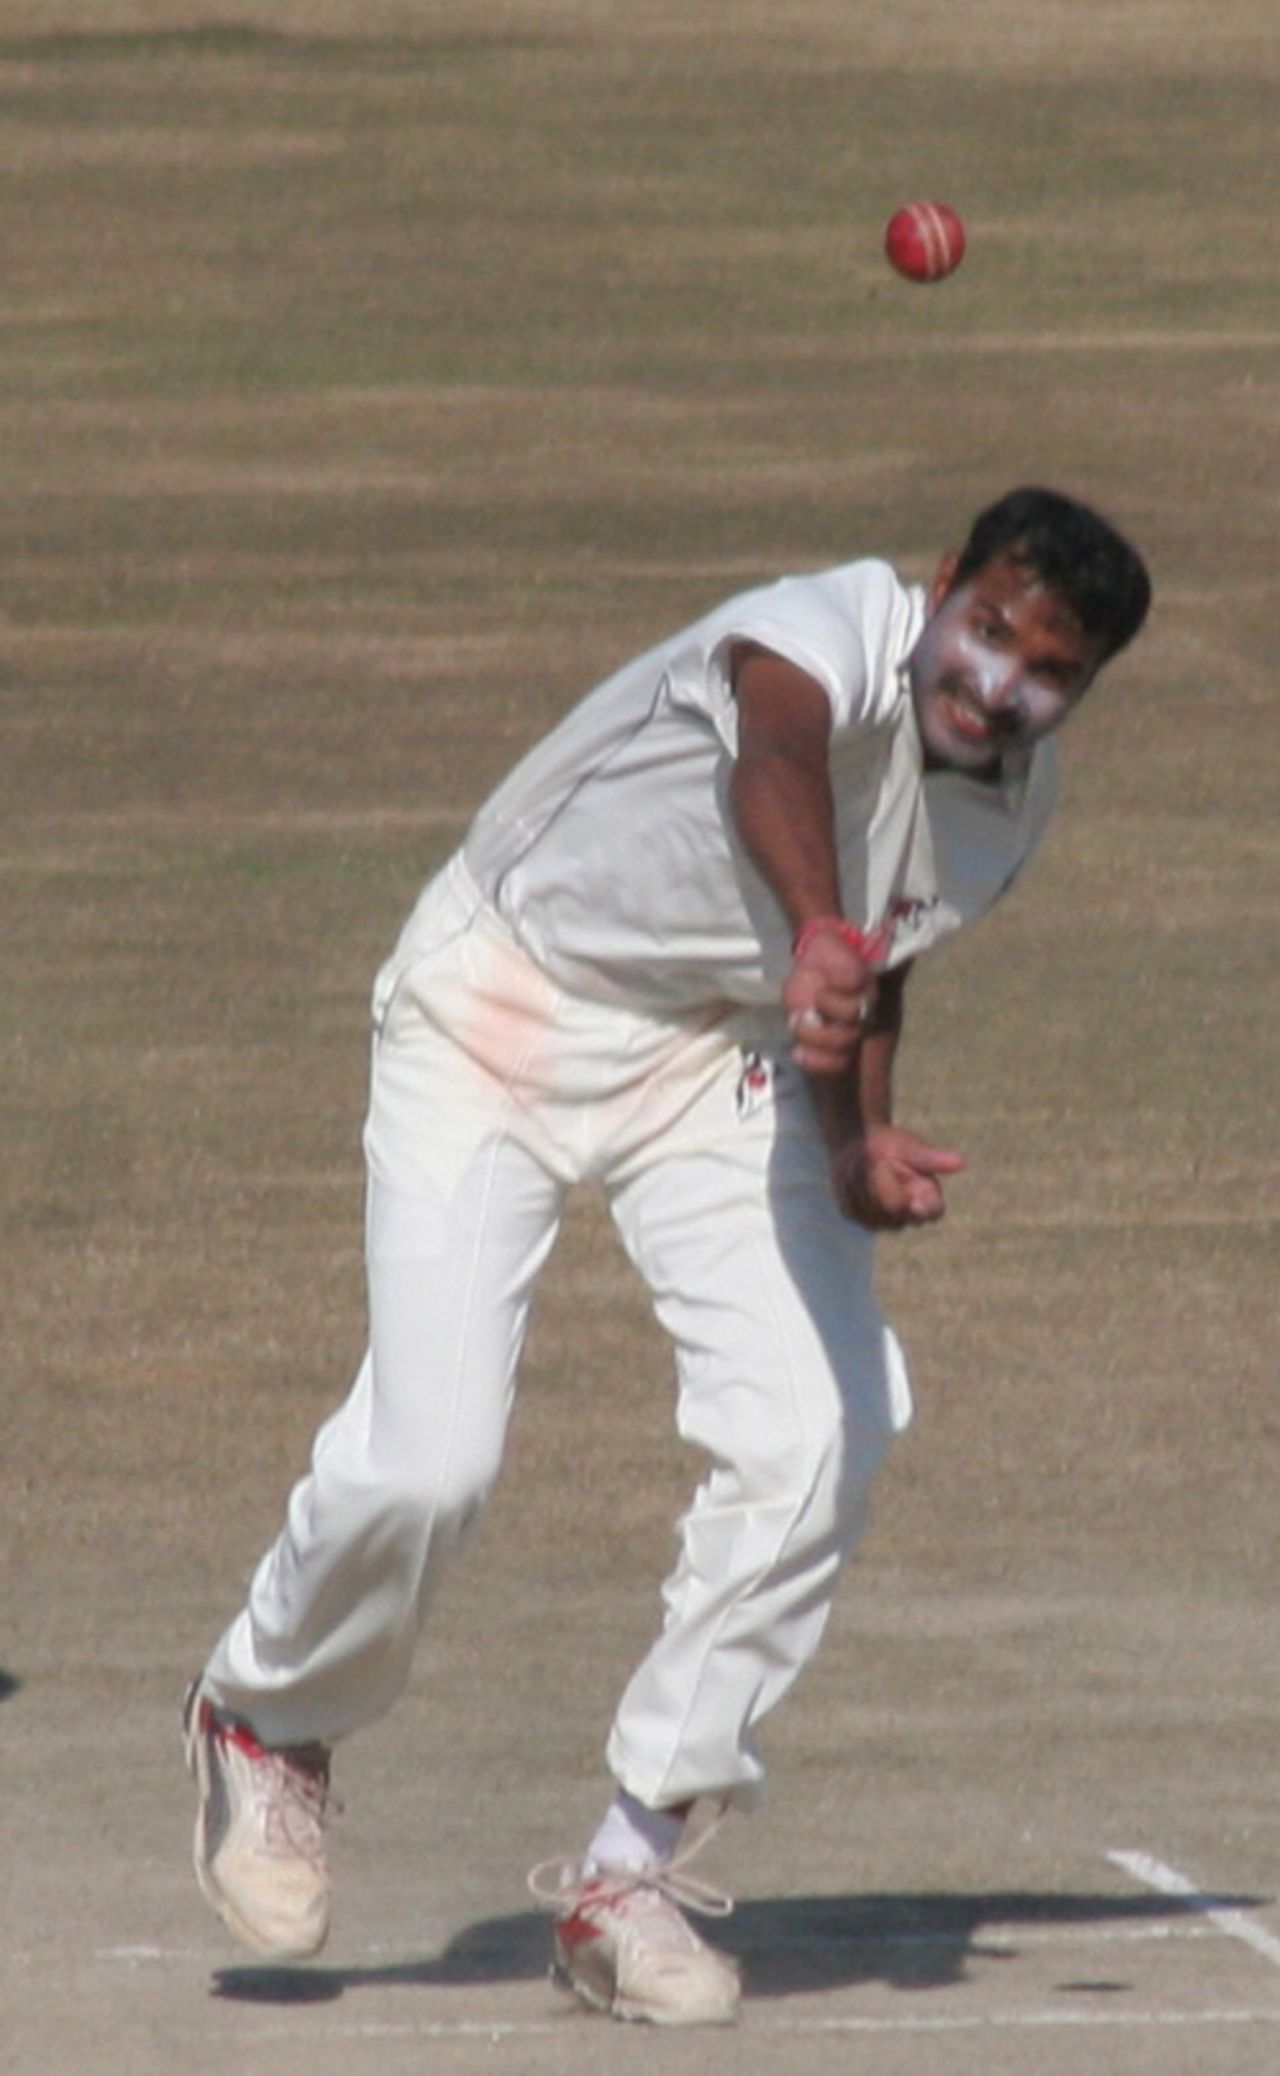 Rajasthan's Sumit Mathur fires in a delivery, Himachal Pradesh v Rajasthan, Ranji Trophy Super League, Group A, 7th round, 3rd day, Dharamsala, December 27, 2007 